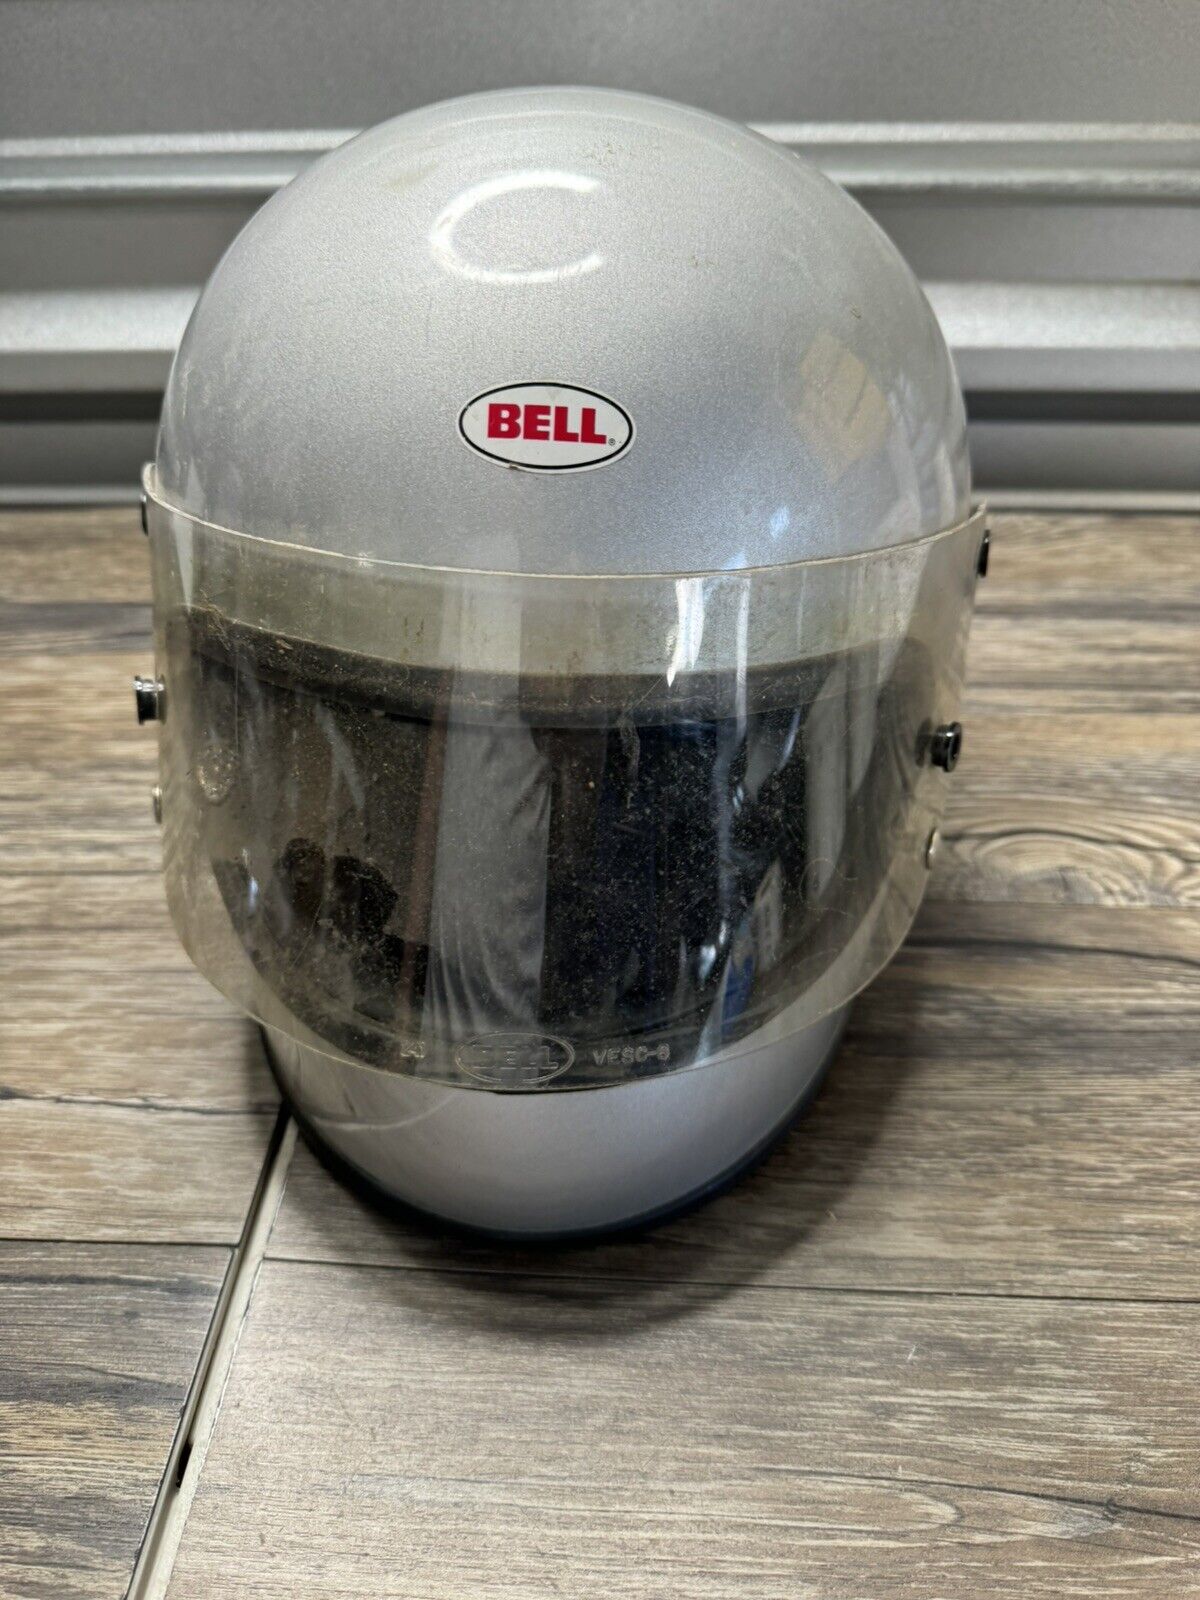 Vintage 1975 Bell Star Motorcycle Racing Helmet Size 8 1/4 Rare Gray Full Face